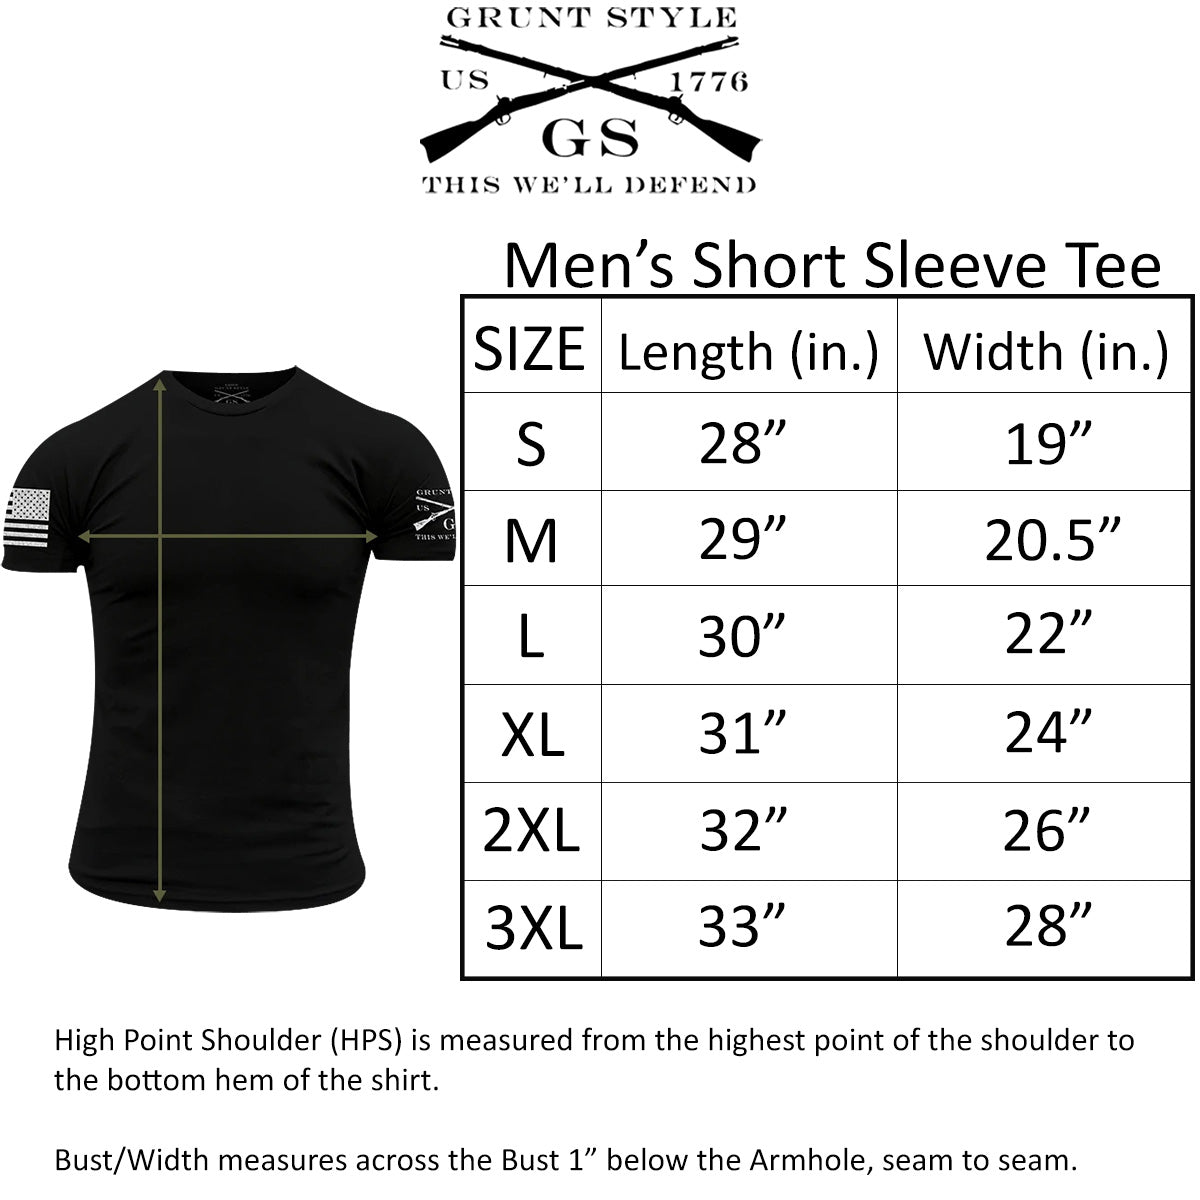 Grunt Style Old No. 76 T-Shirt - Black Grunt Style